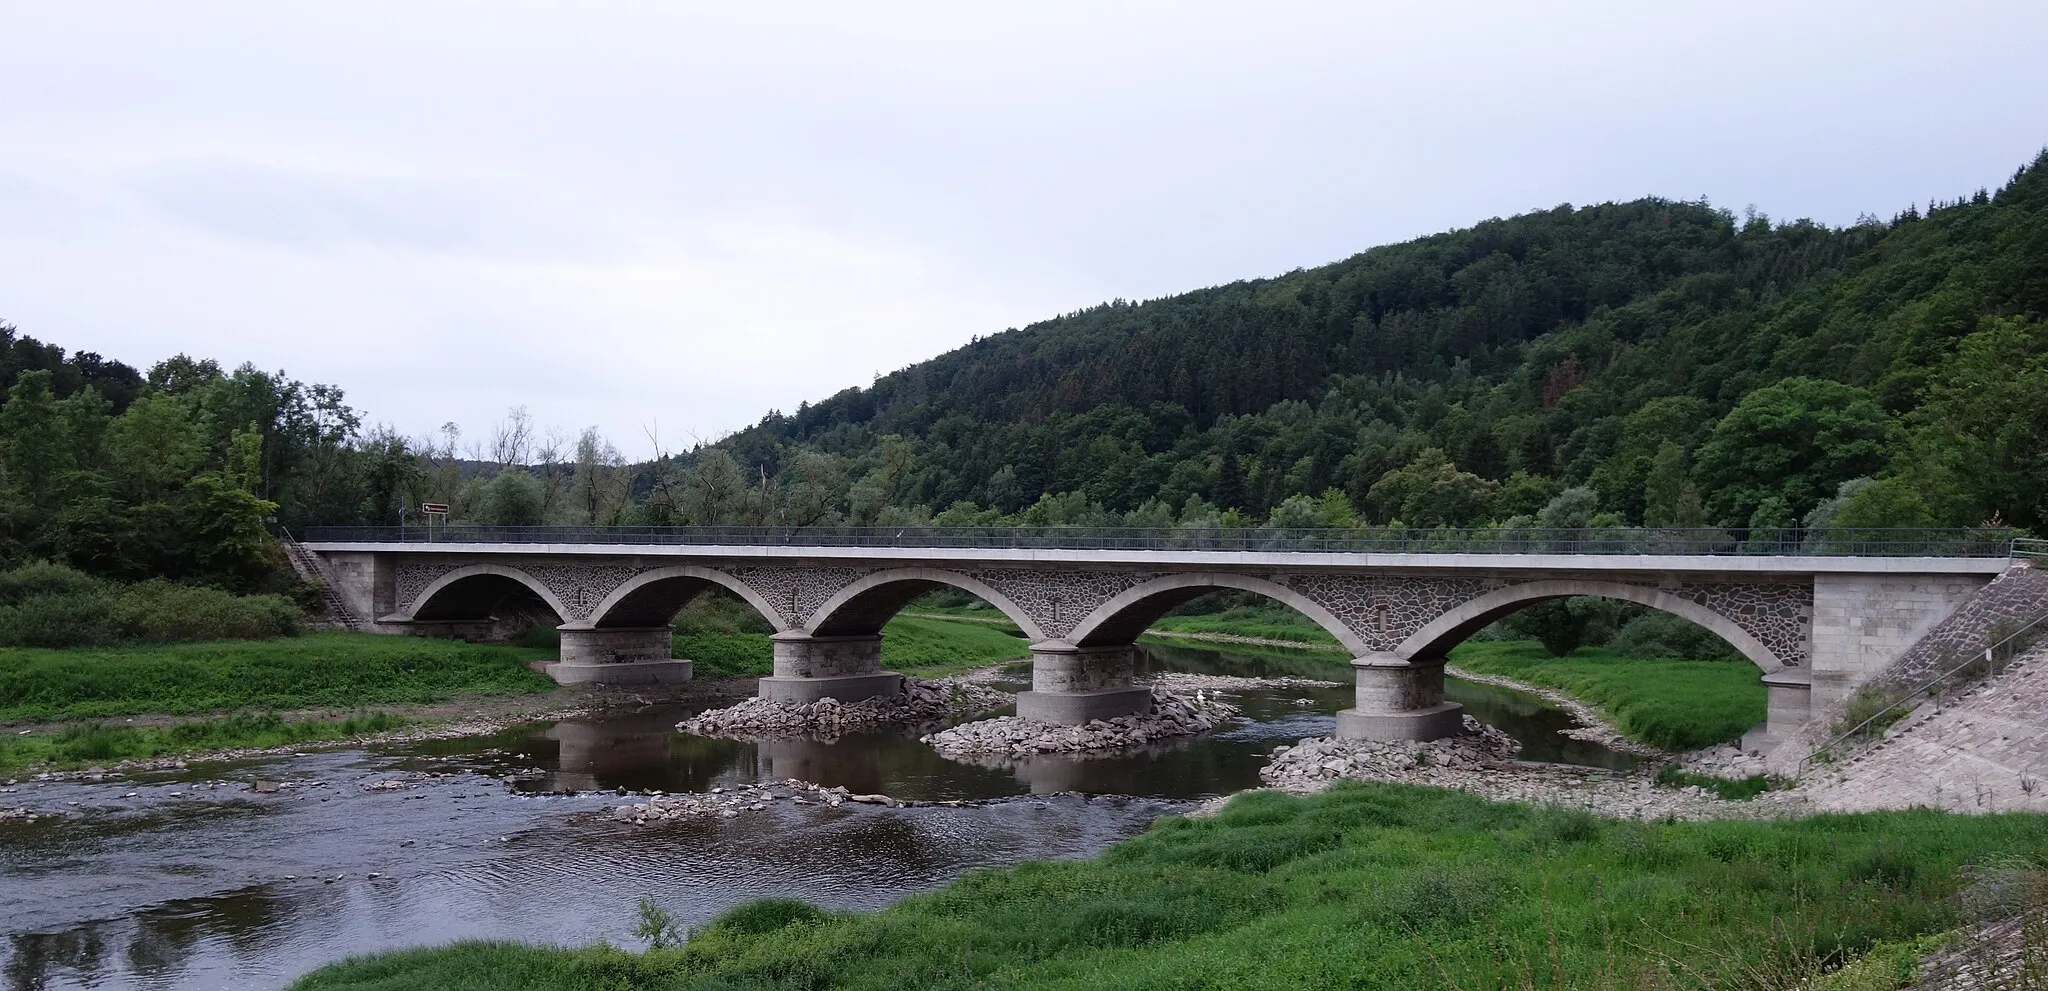 Photo showing: North-eastern view of the bridge of state road L3084across Eder river in Herzhausen , Vöhl municipality , Waldeck-Frankenberg district, Hesse state, Germany.